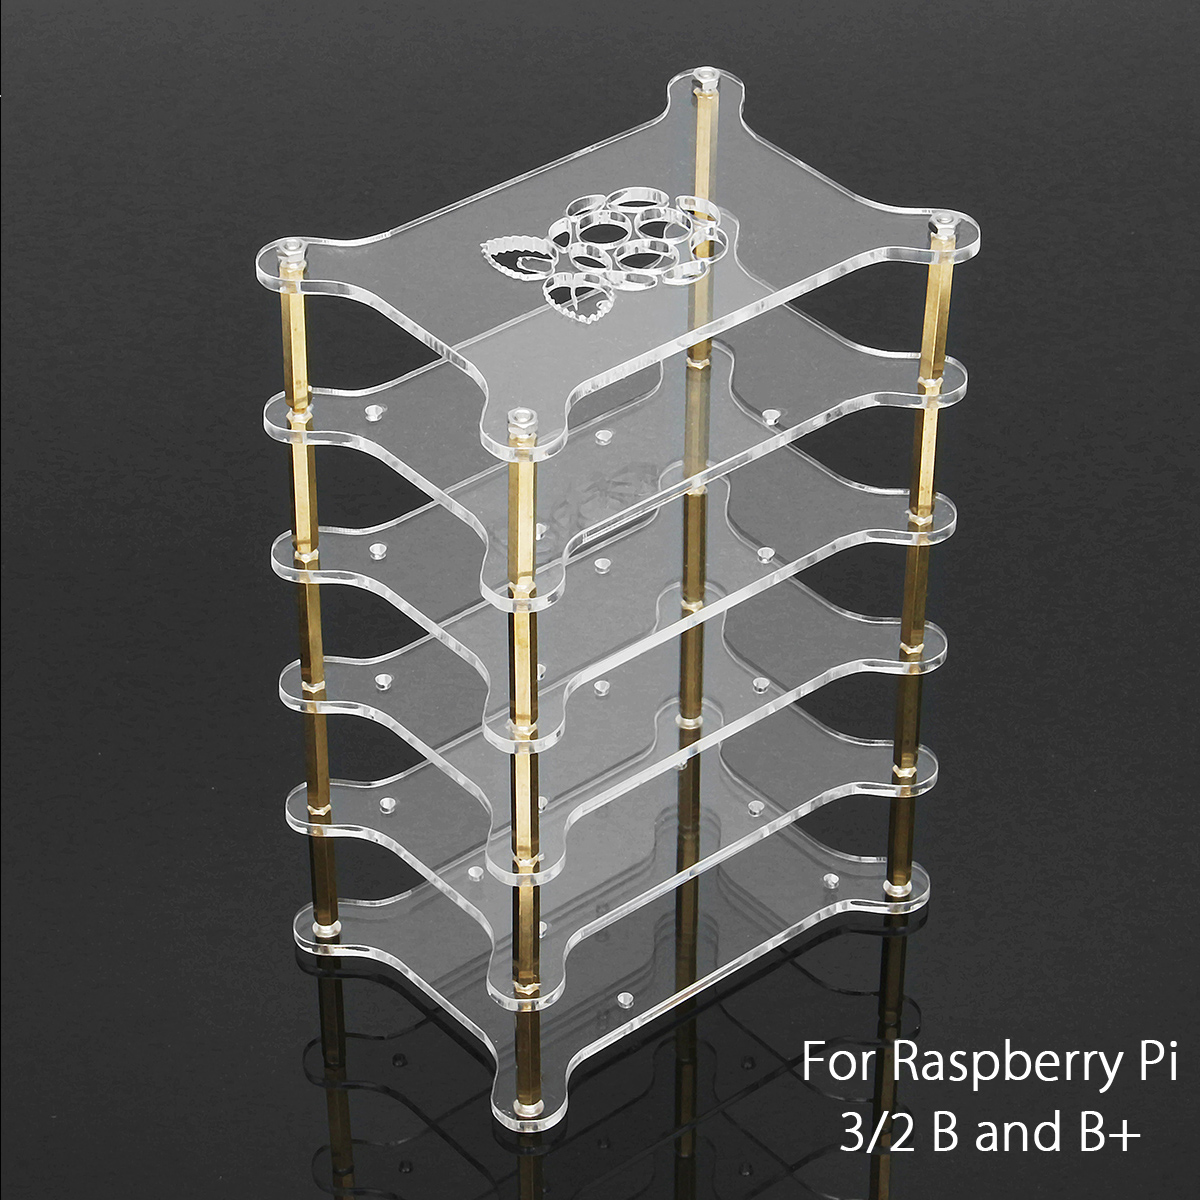 Clear Acrylic 5 Layer Cluster Case Shelf Stack For Raspberry Pi 3/2 B and B+ 18